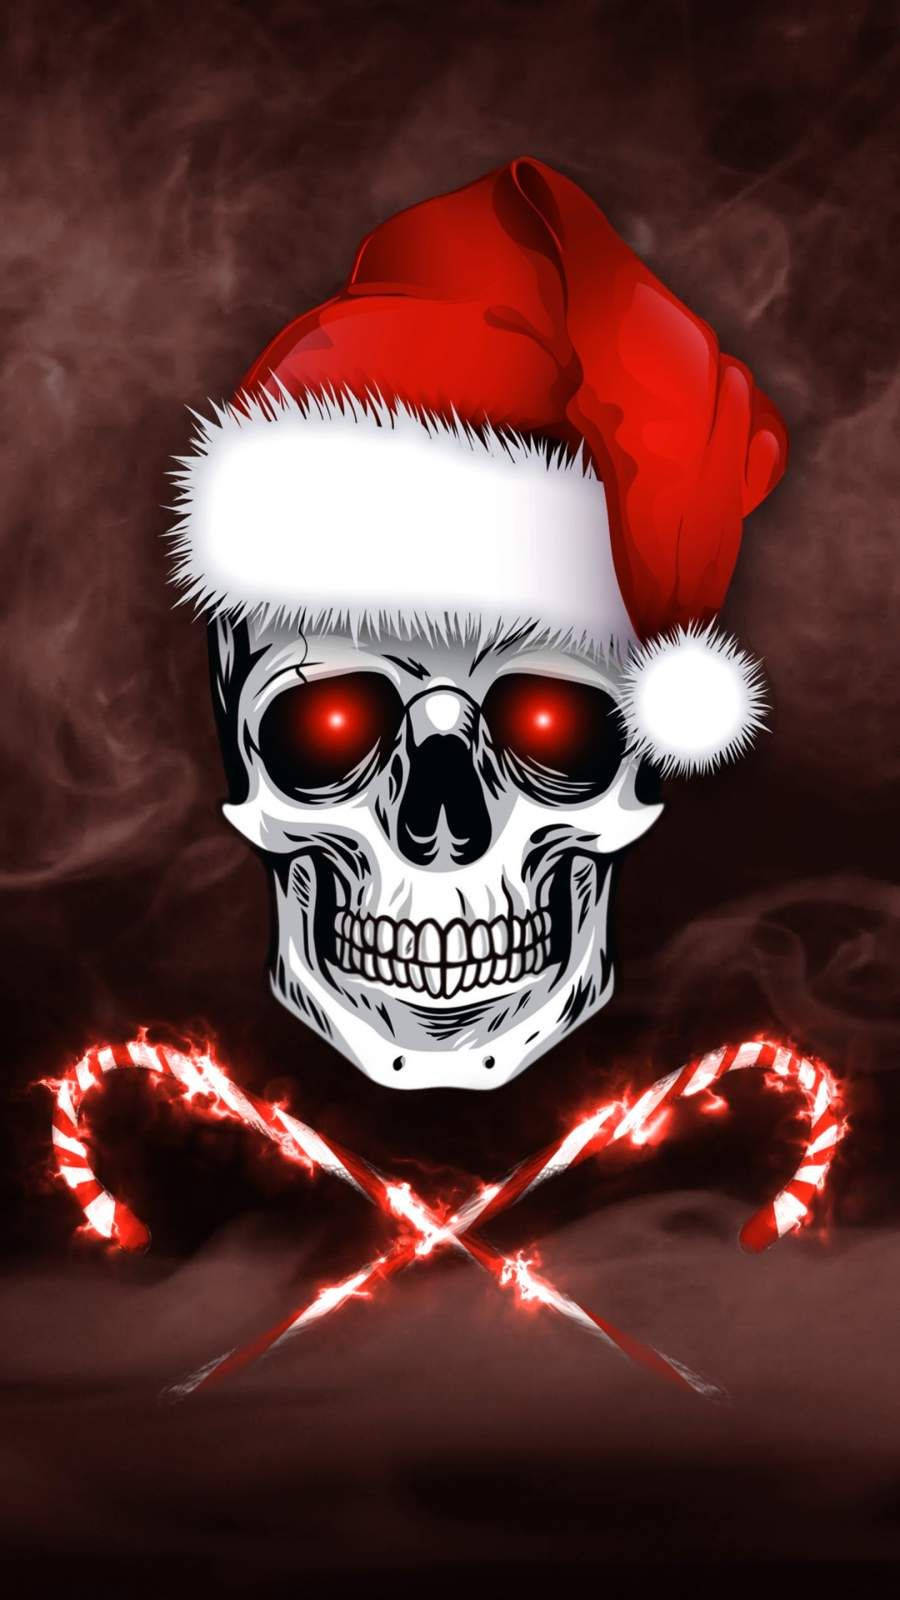 Skull With Glowing Eyes For Gothic Christmas Wallpaper